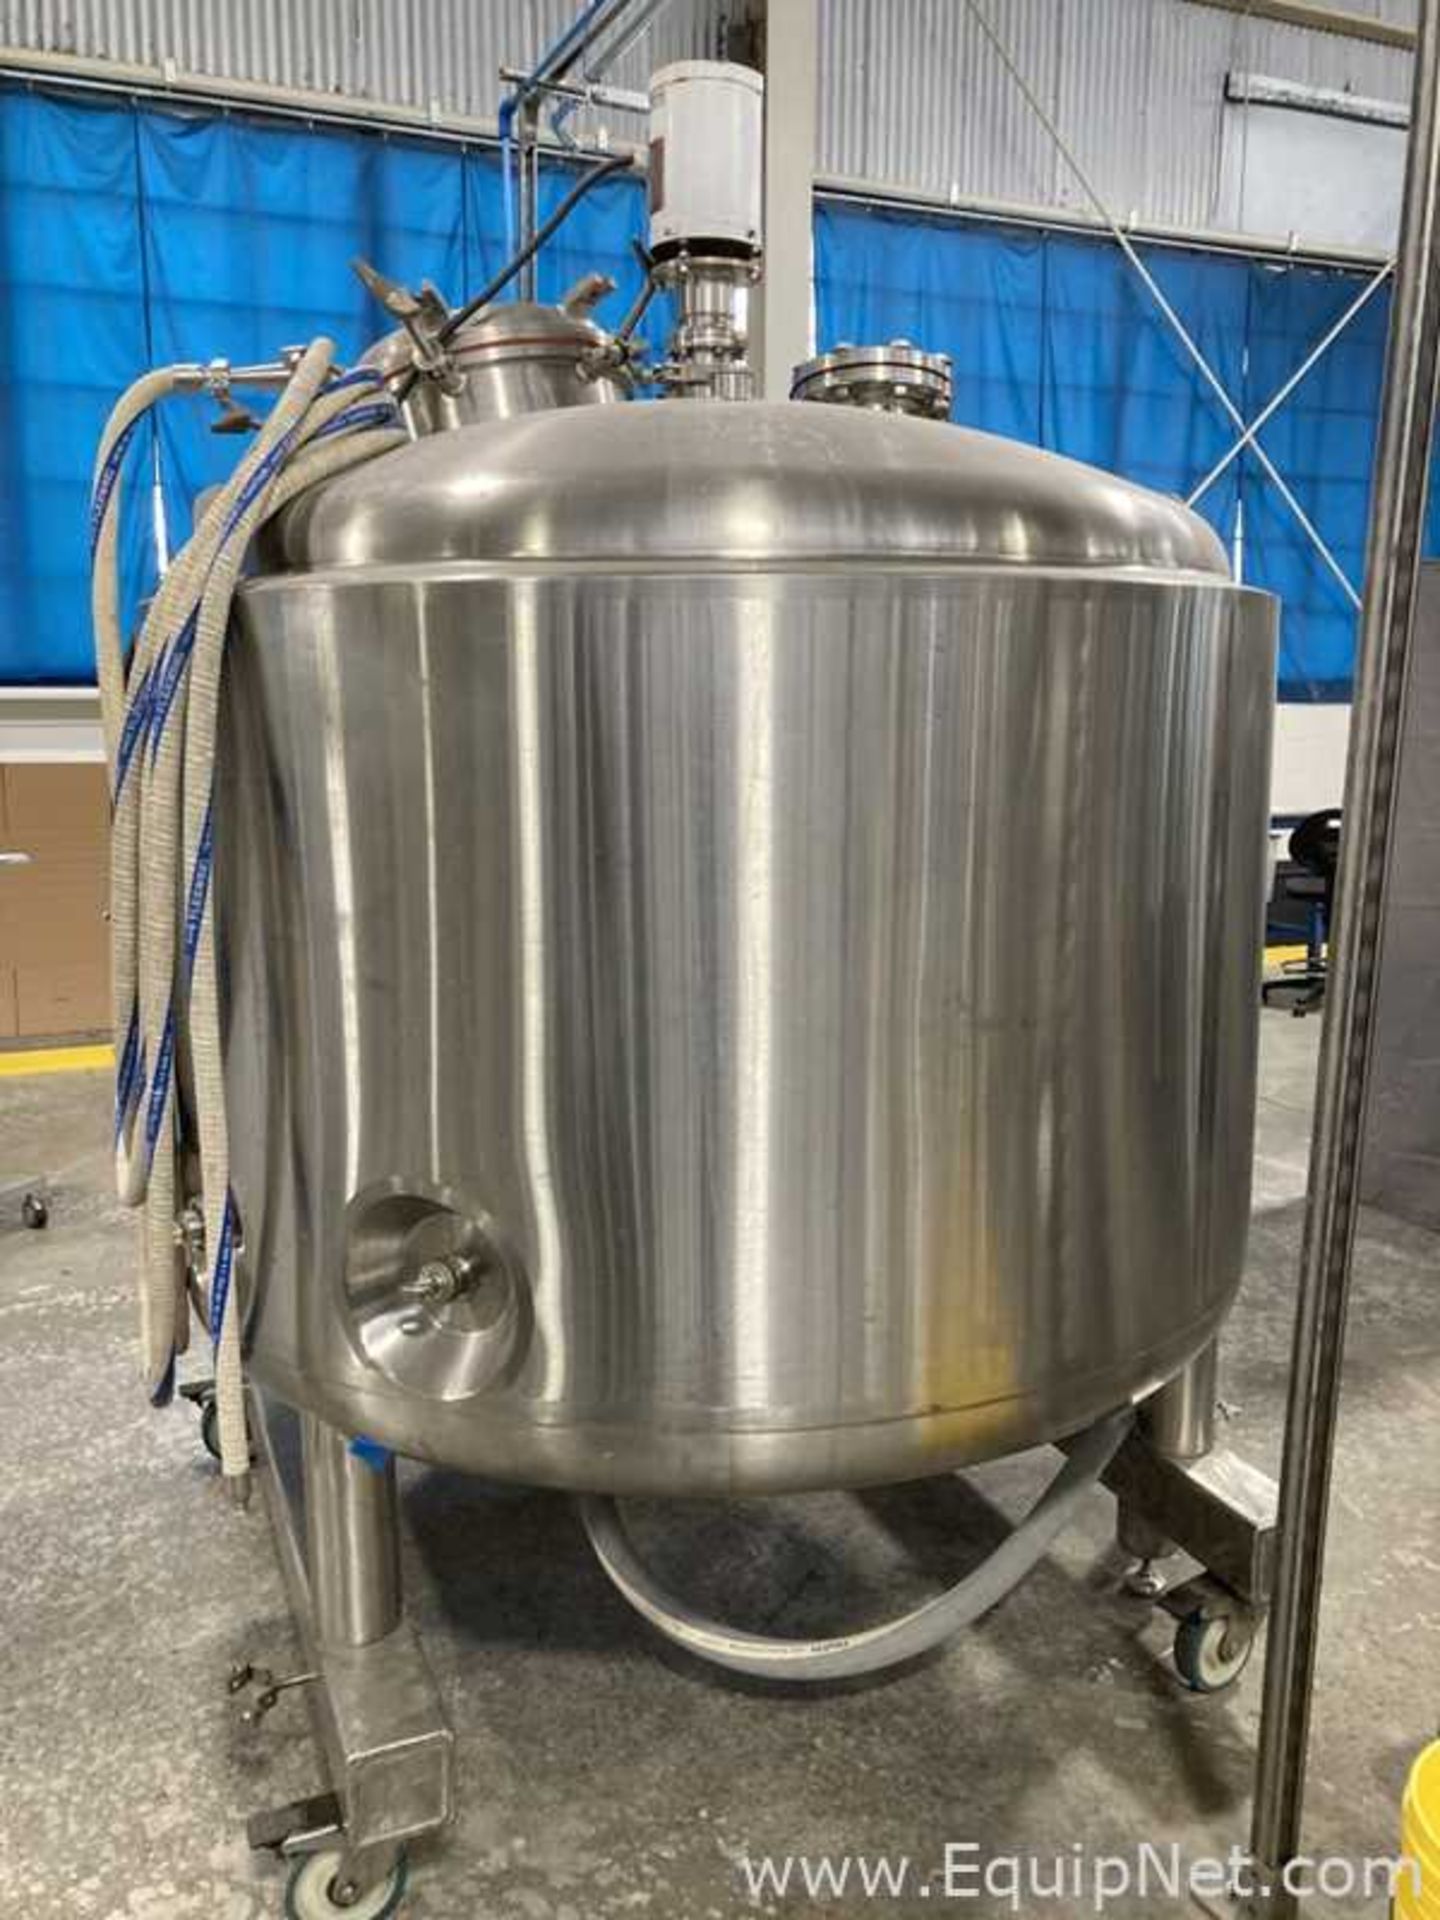 Precision Stainless 1500 Liter Stainless Steel Tank - Image 8 of 14